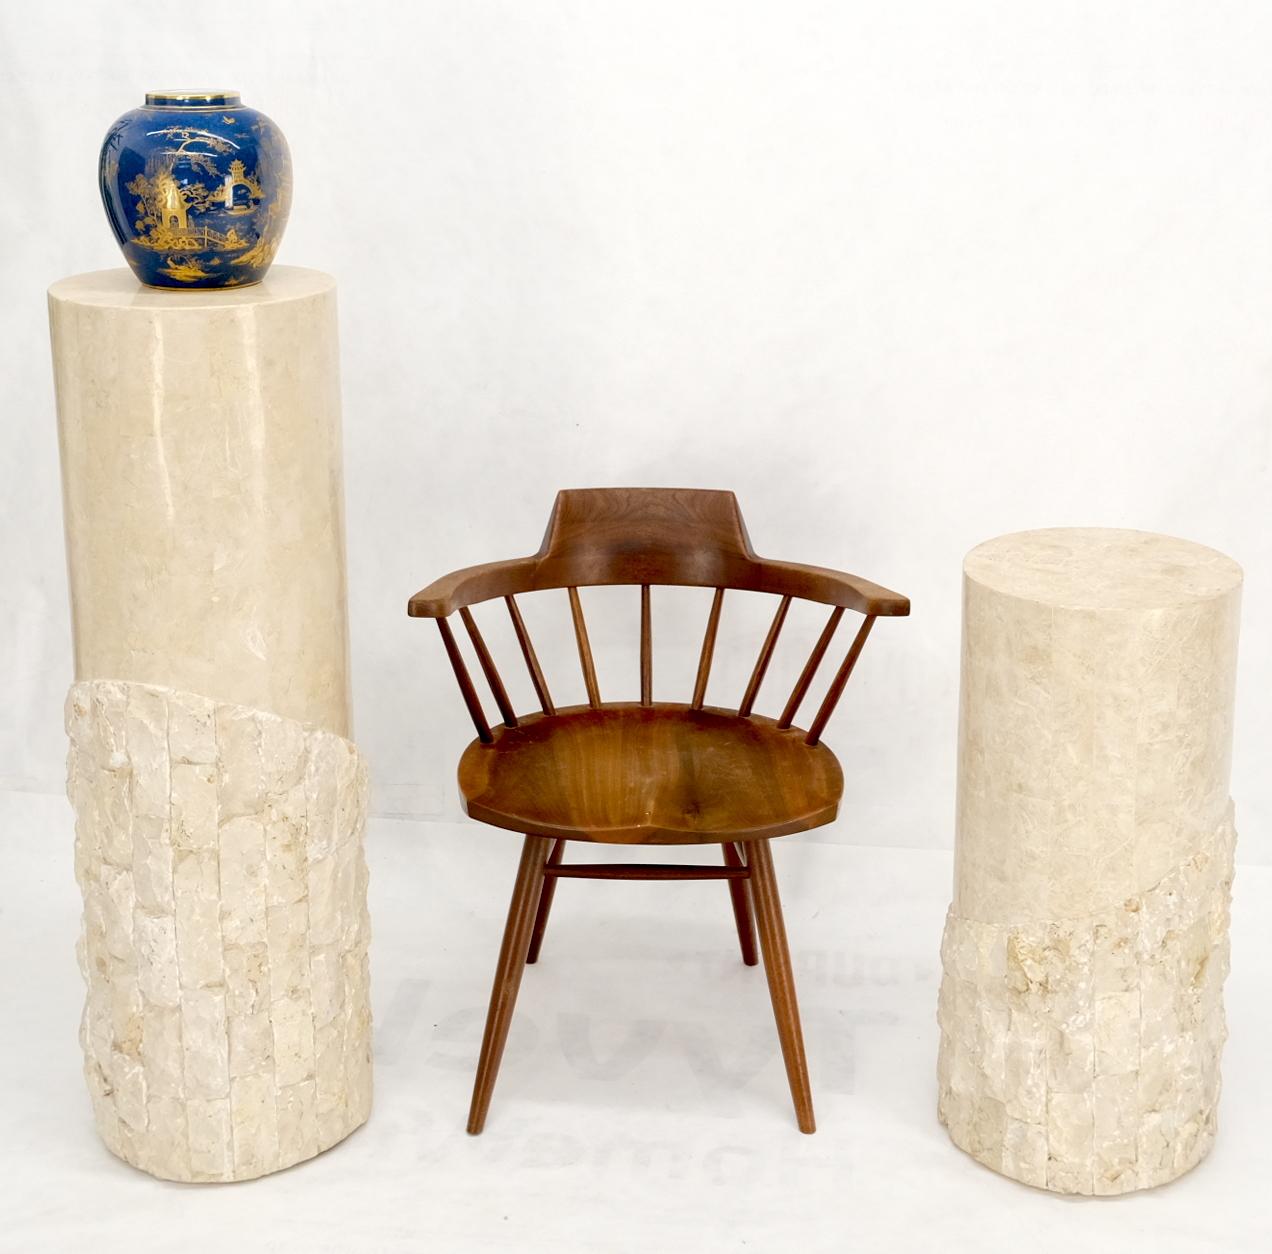 Pair of decorative mid century modern decor tessellated stone round pedestals. The short one is 29